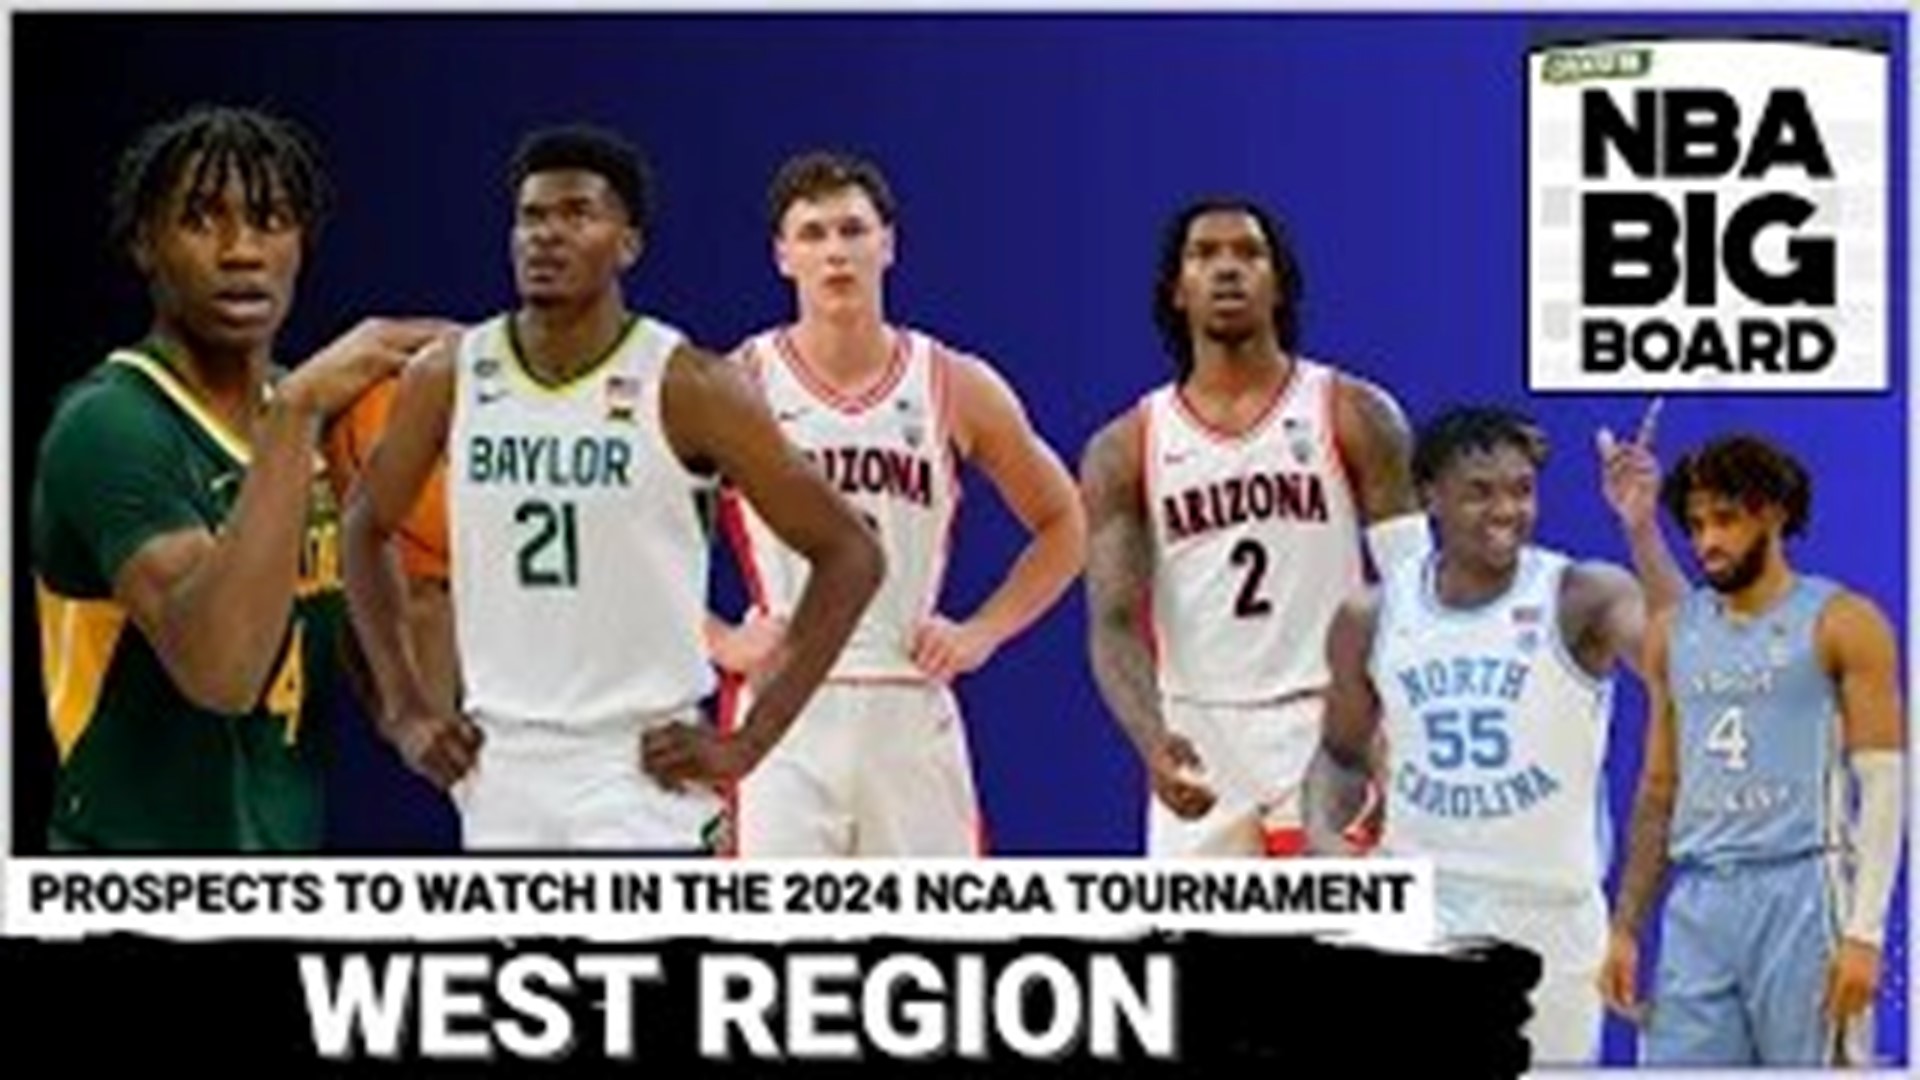 Rafael Barlowe and Leif Thulin deep dive into the top NBA prospects playing in the West Region of the 2024 NCAA tournament. They provide expert analysis and insights